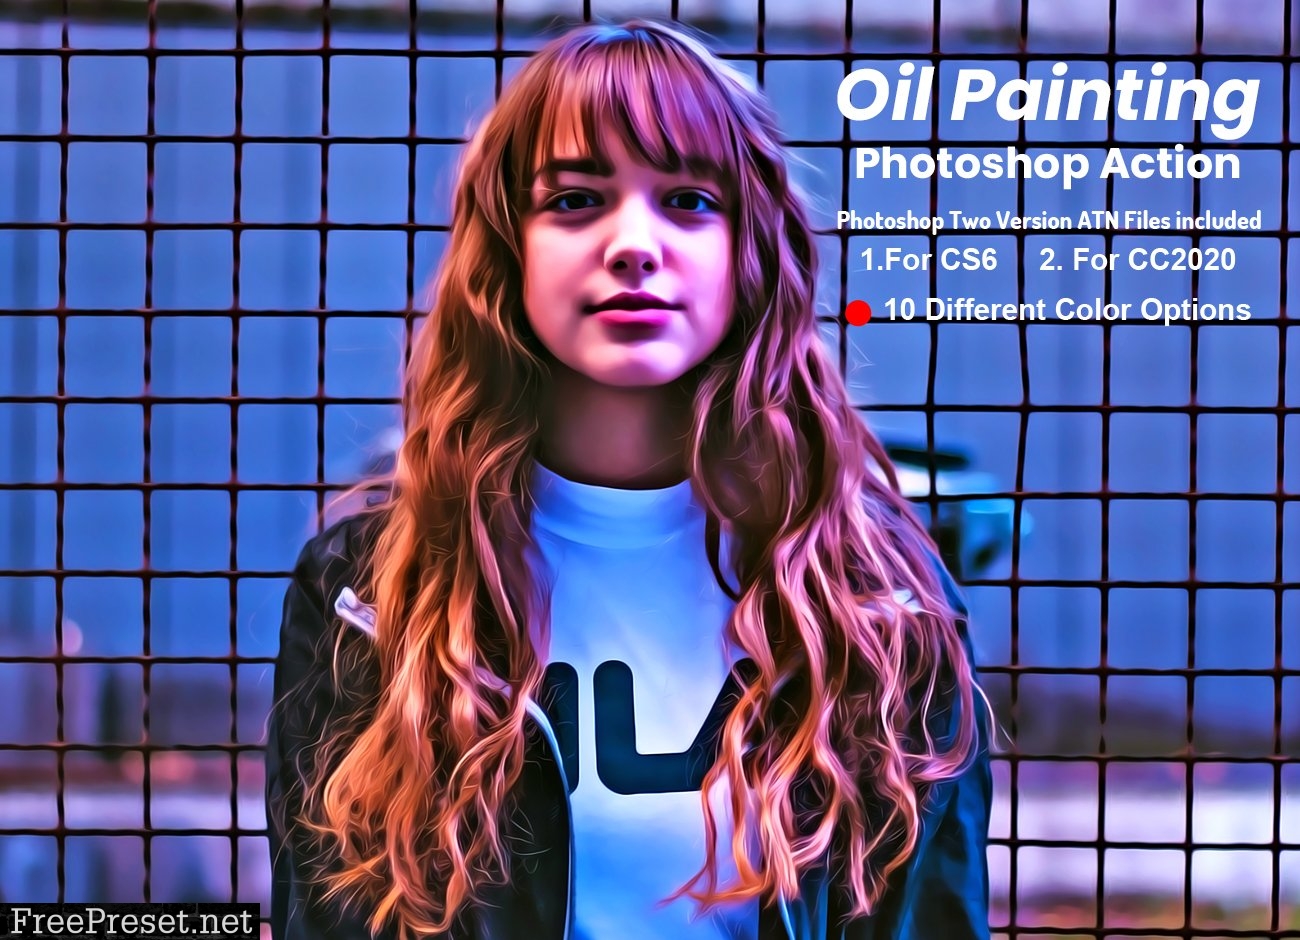 Oil Painting Photoshop Action V-2 5901162